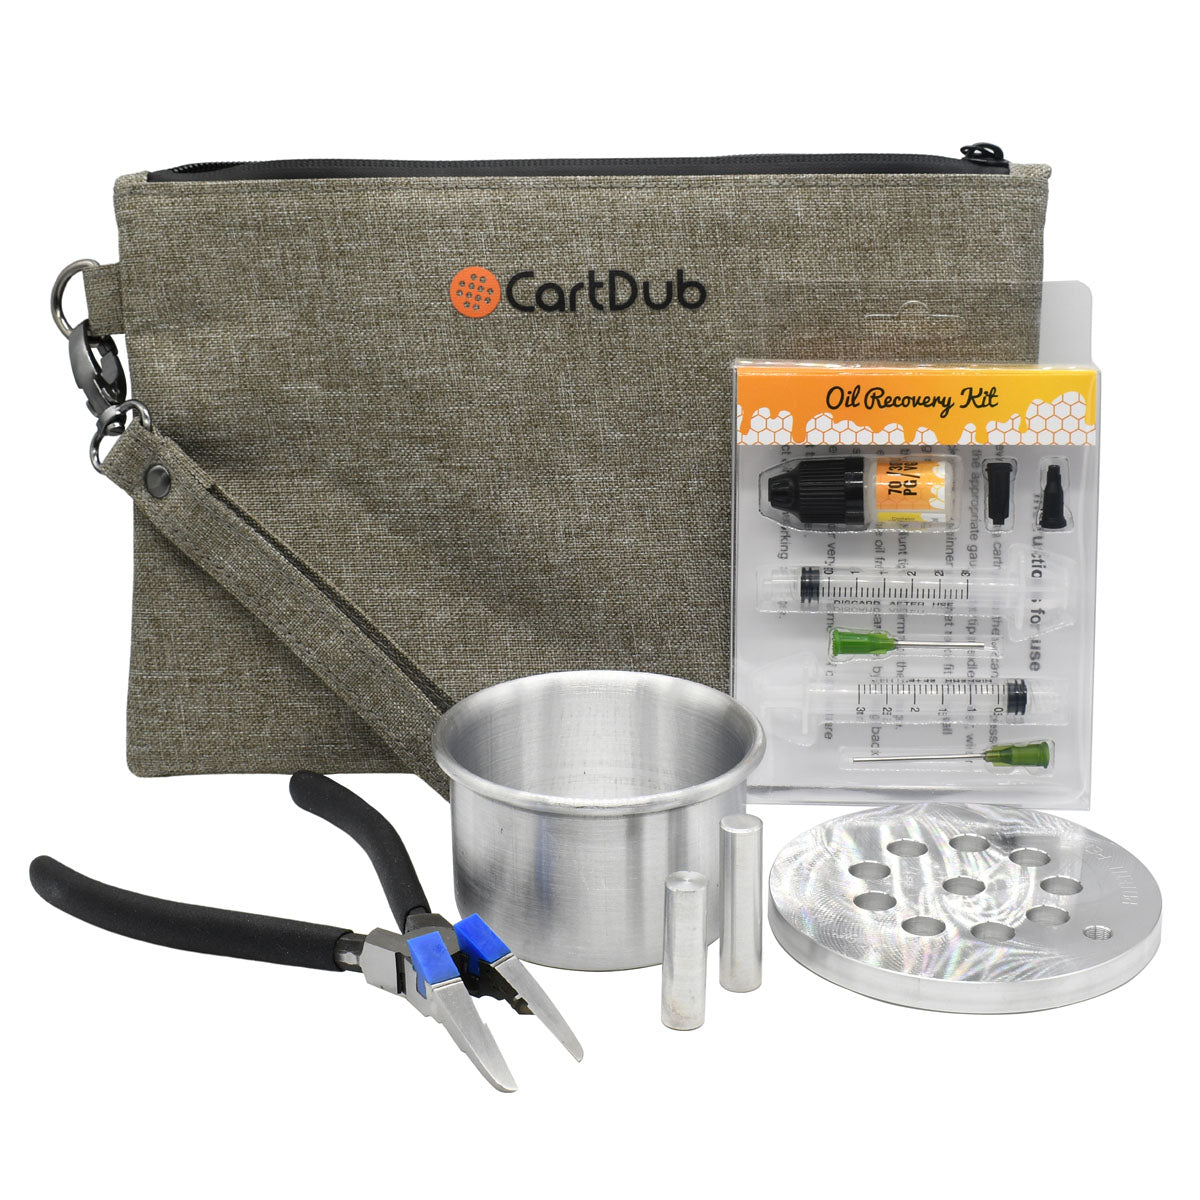 CartDub PLUS Kit to Open Locked 510 Carts and Remove Oil